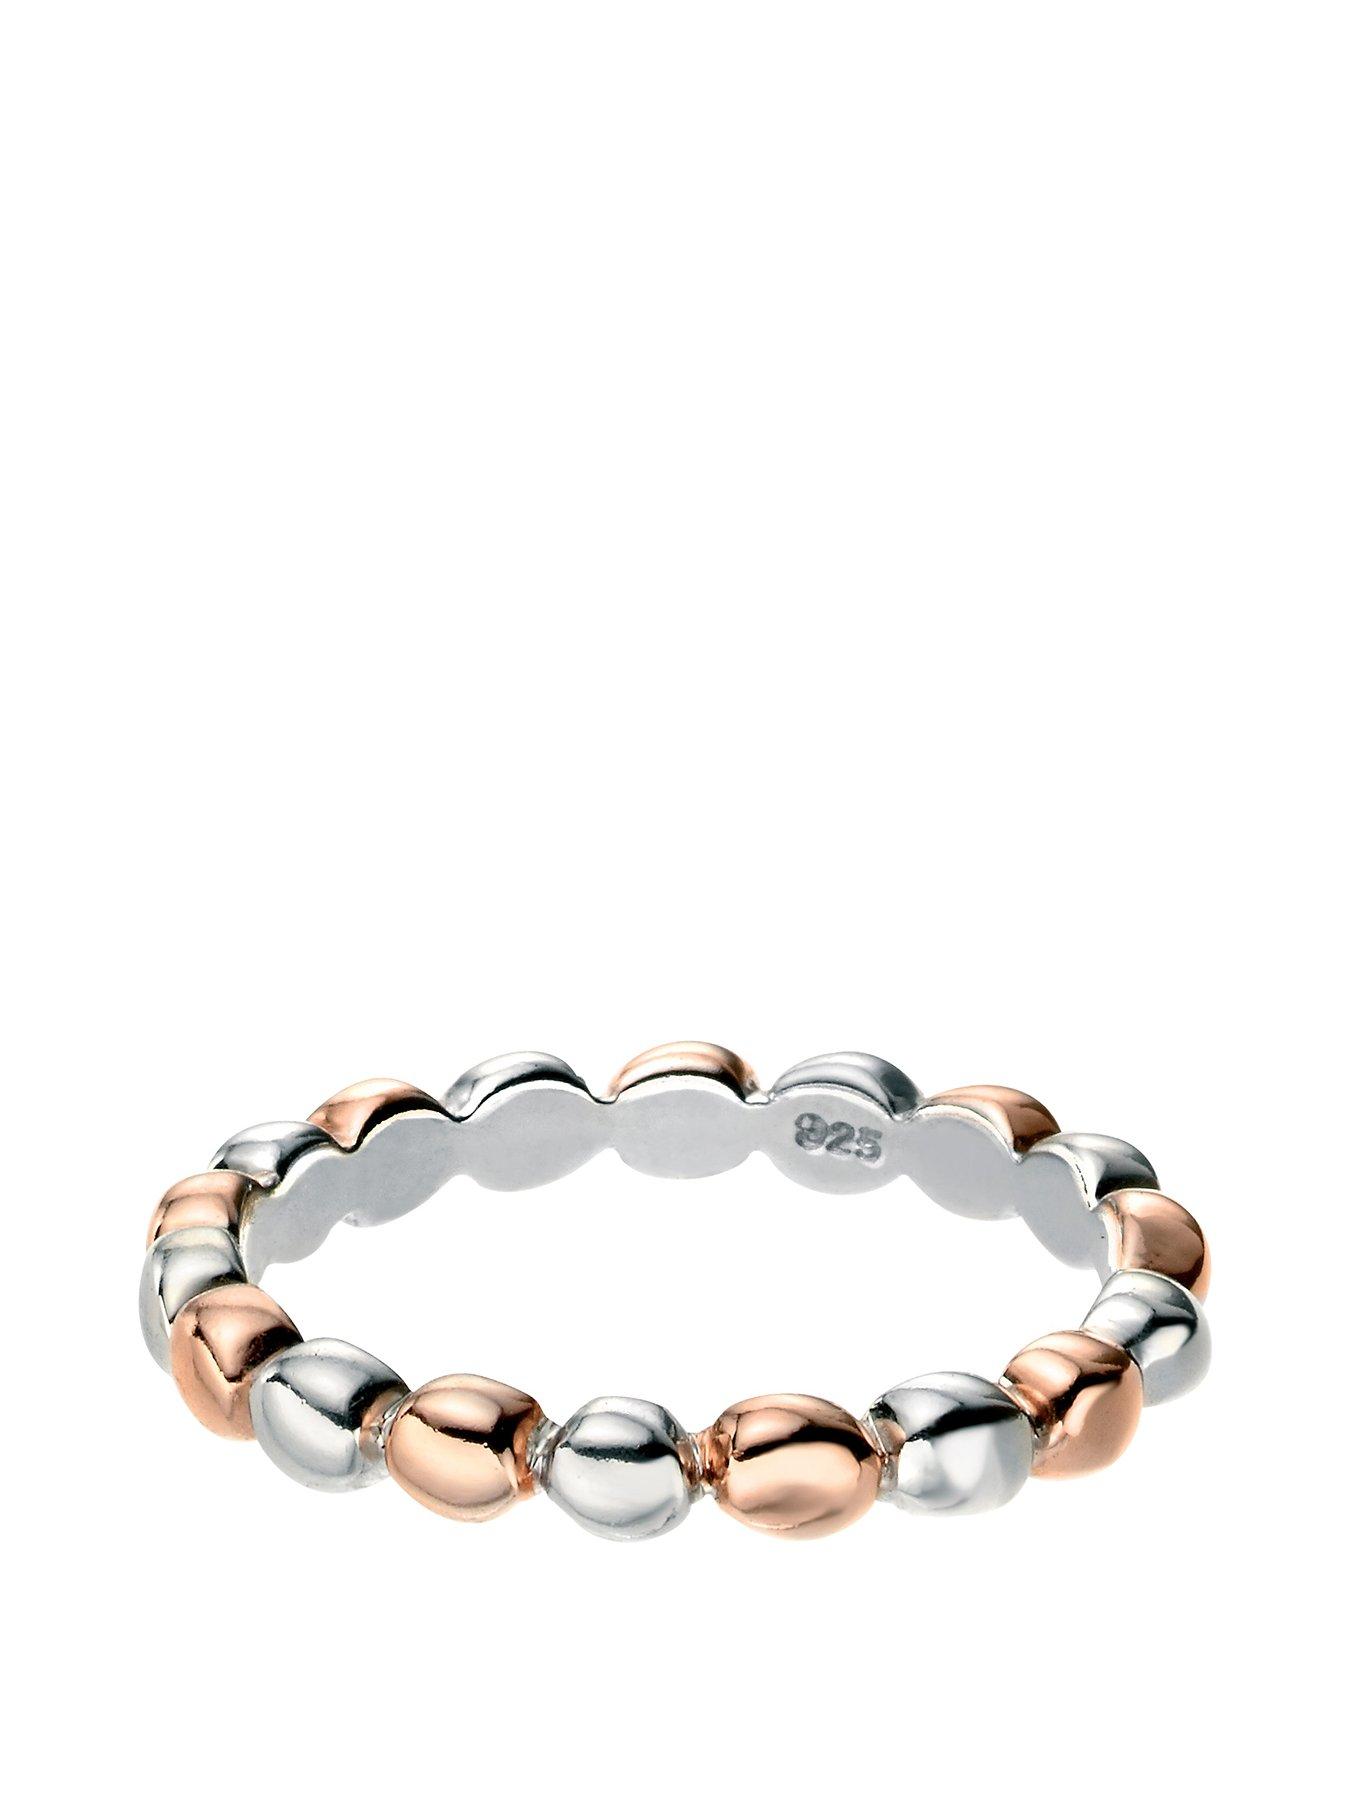 Jewellery & watches Ball band ring with rose gold detail